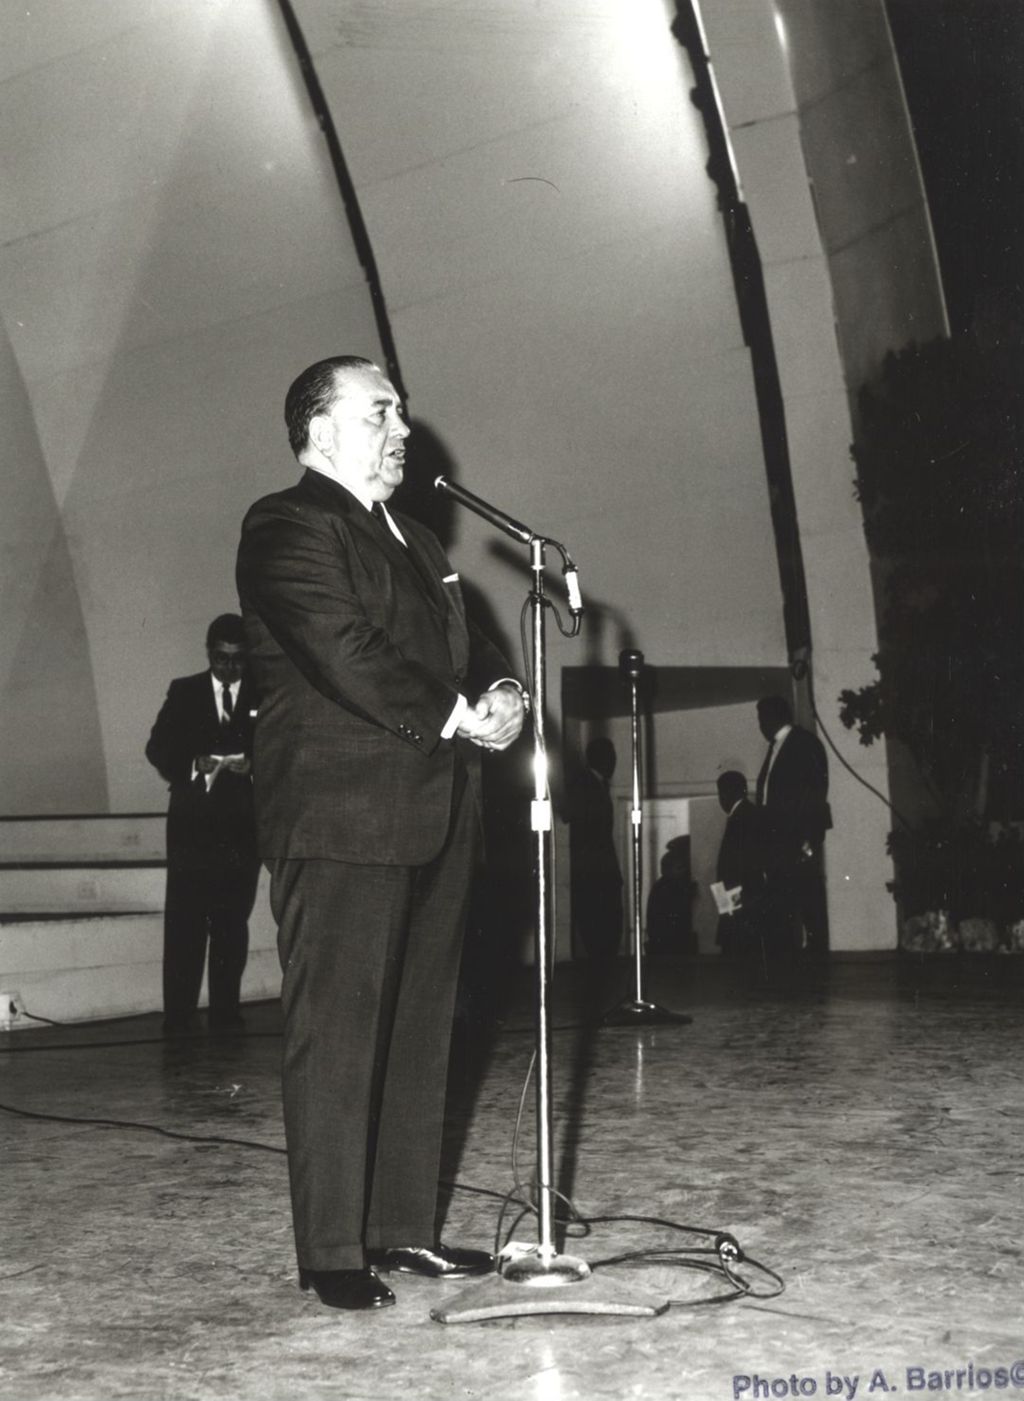 Miniature of Richard J. Daley speaking at the Grant Park bandshell